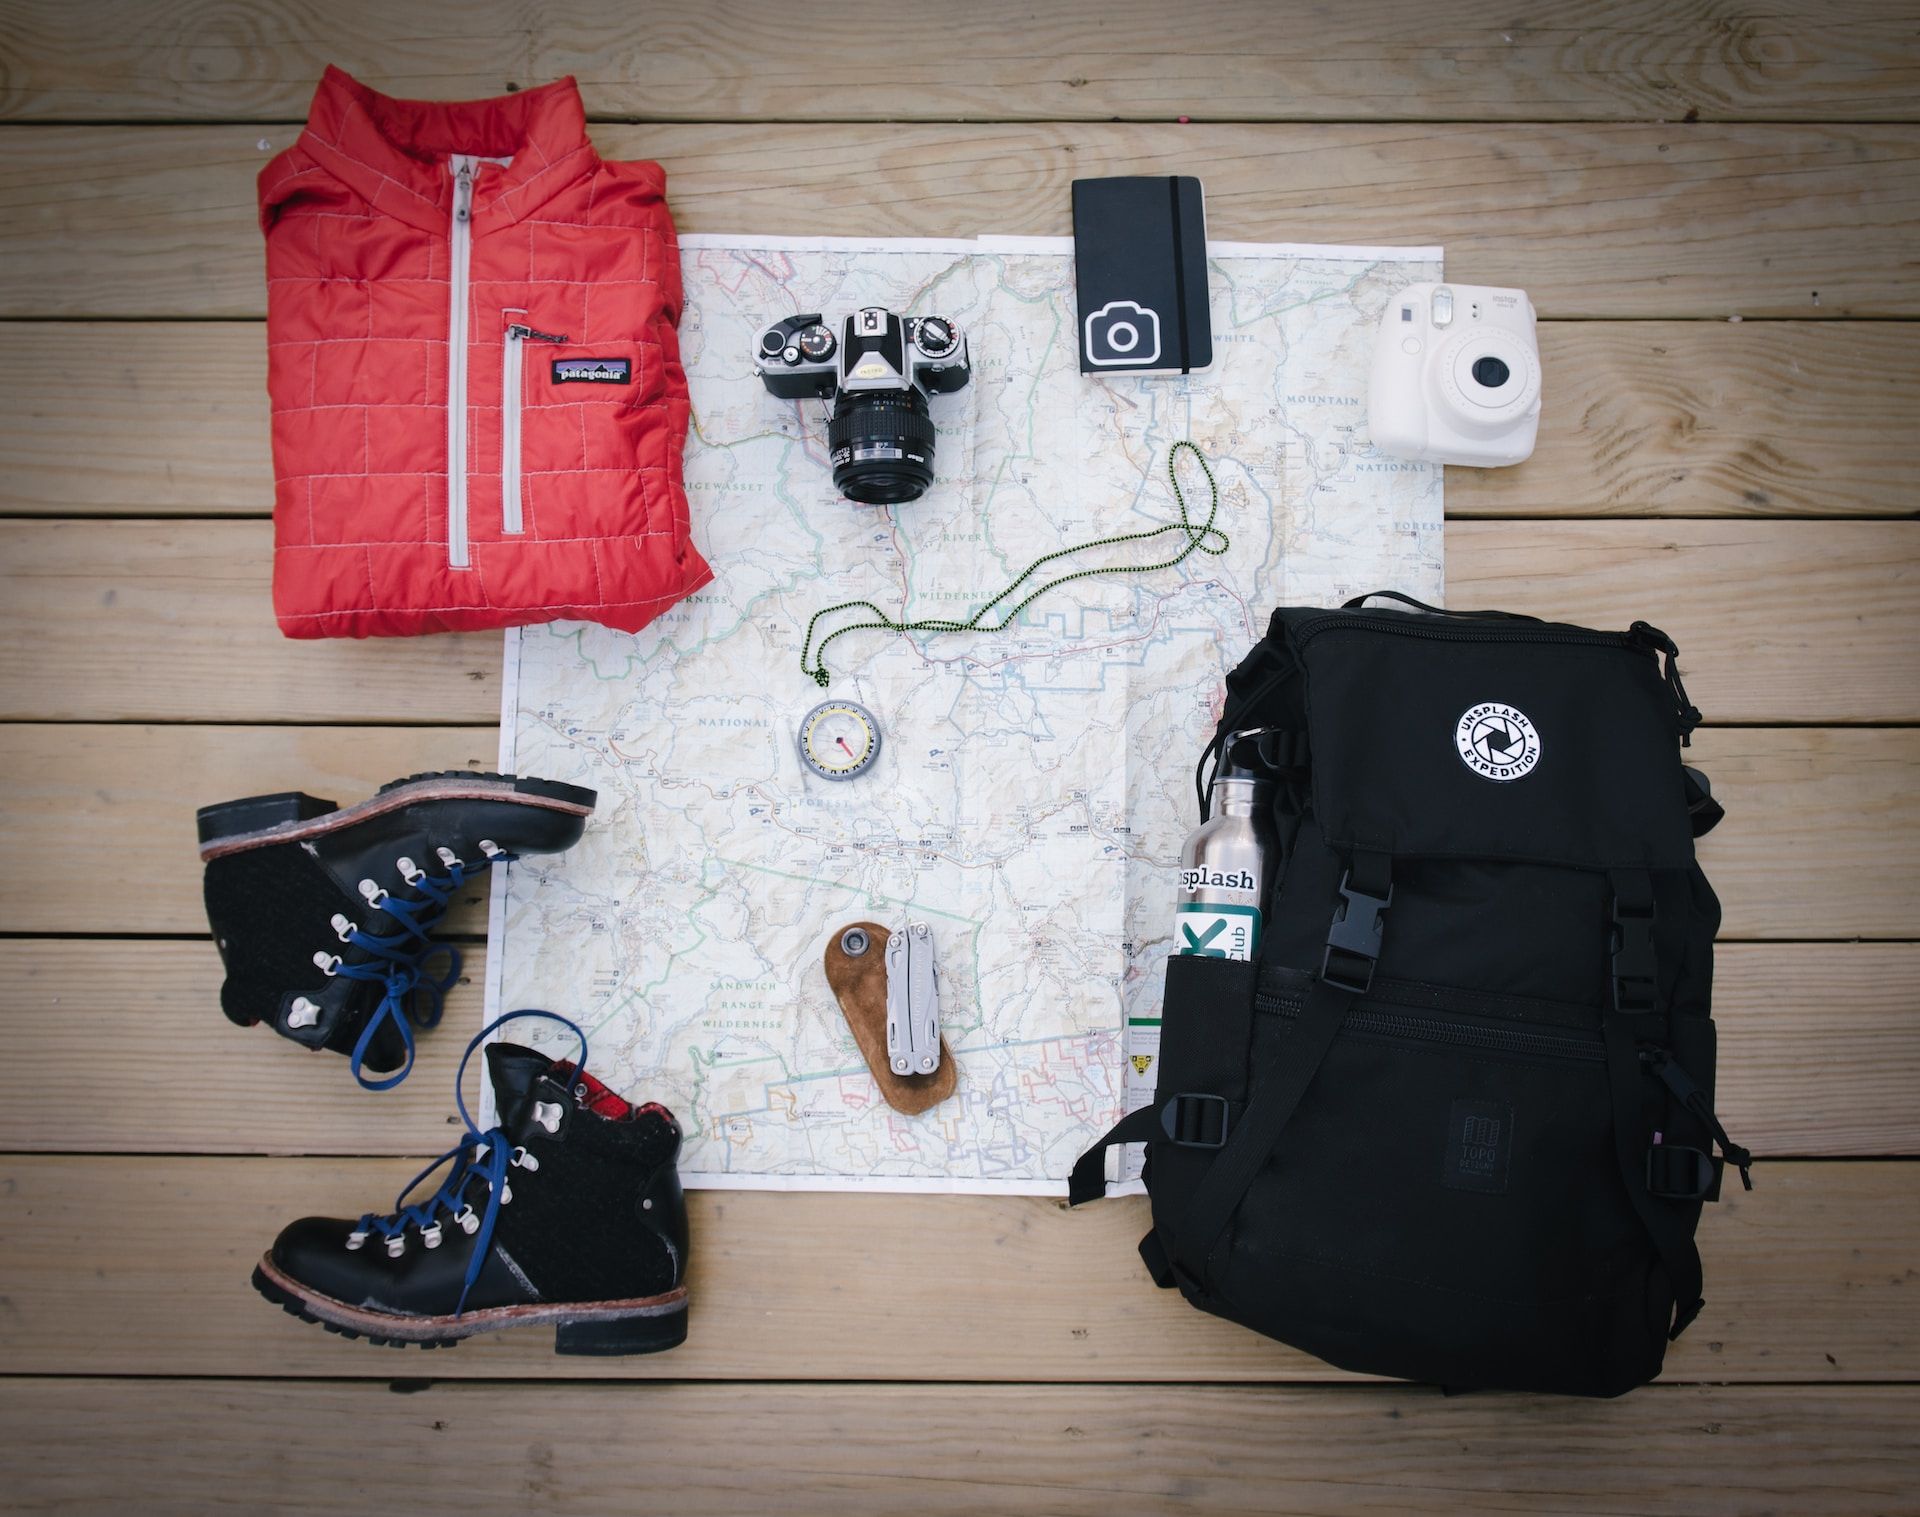 Packing for a hike: boots, a camera, a jacket, a compass, keys, and a backpack